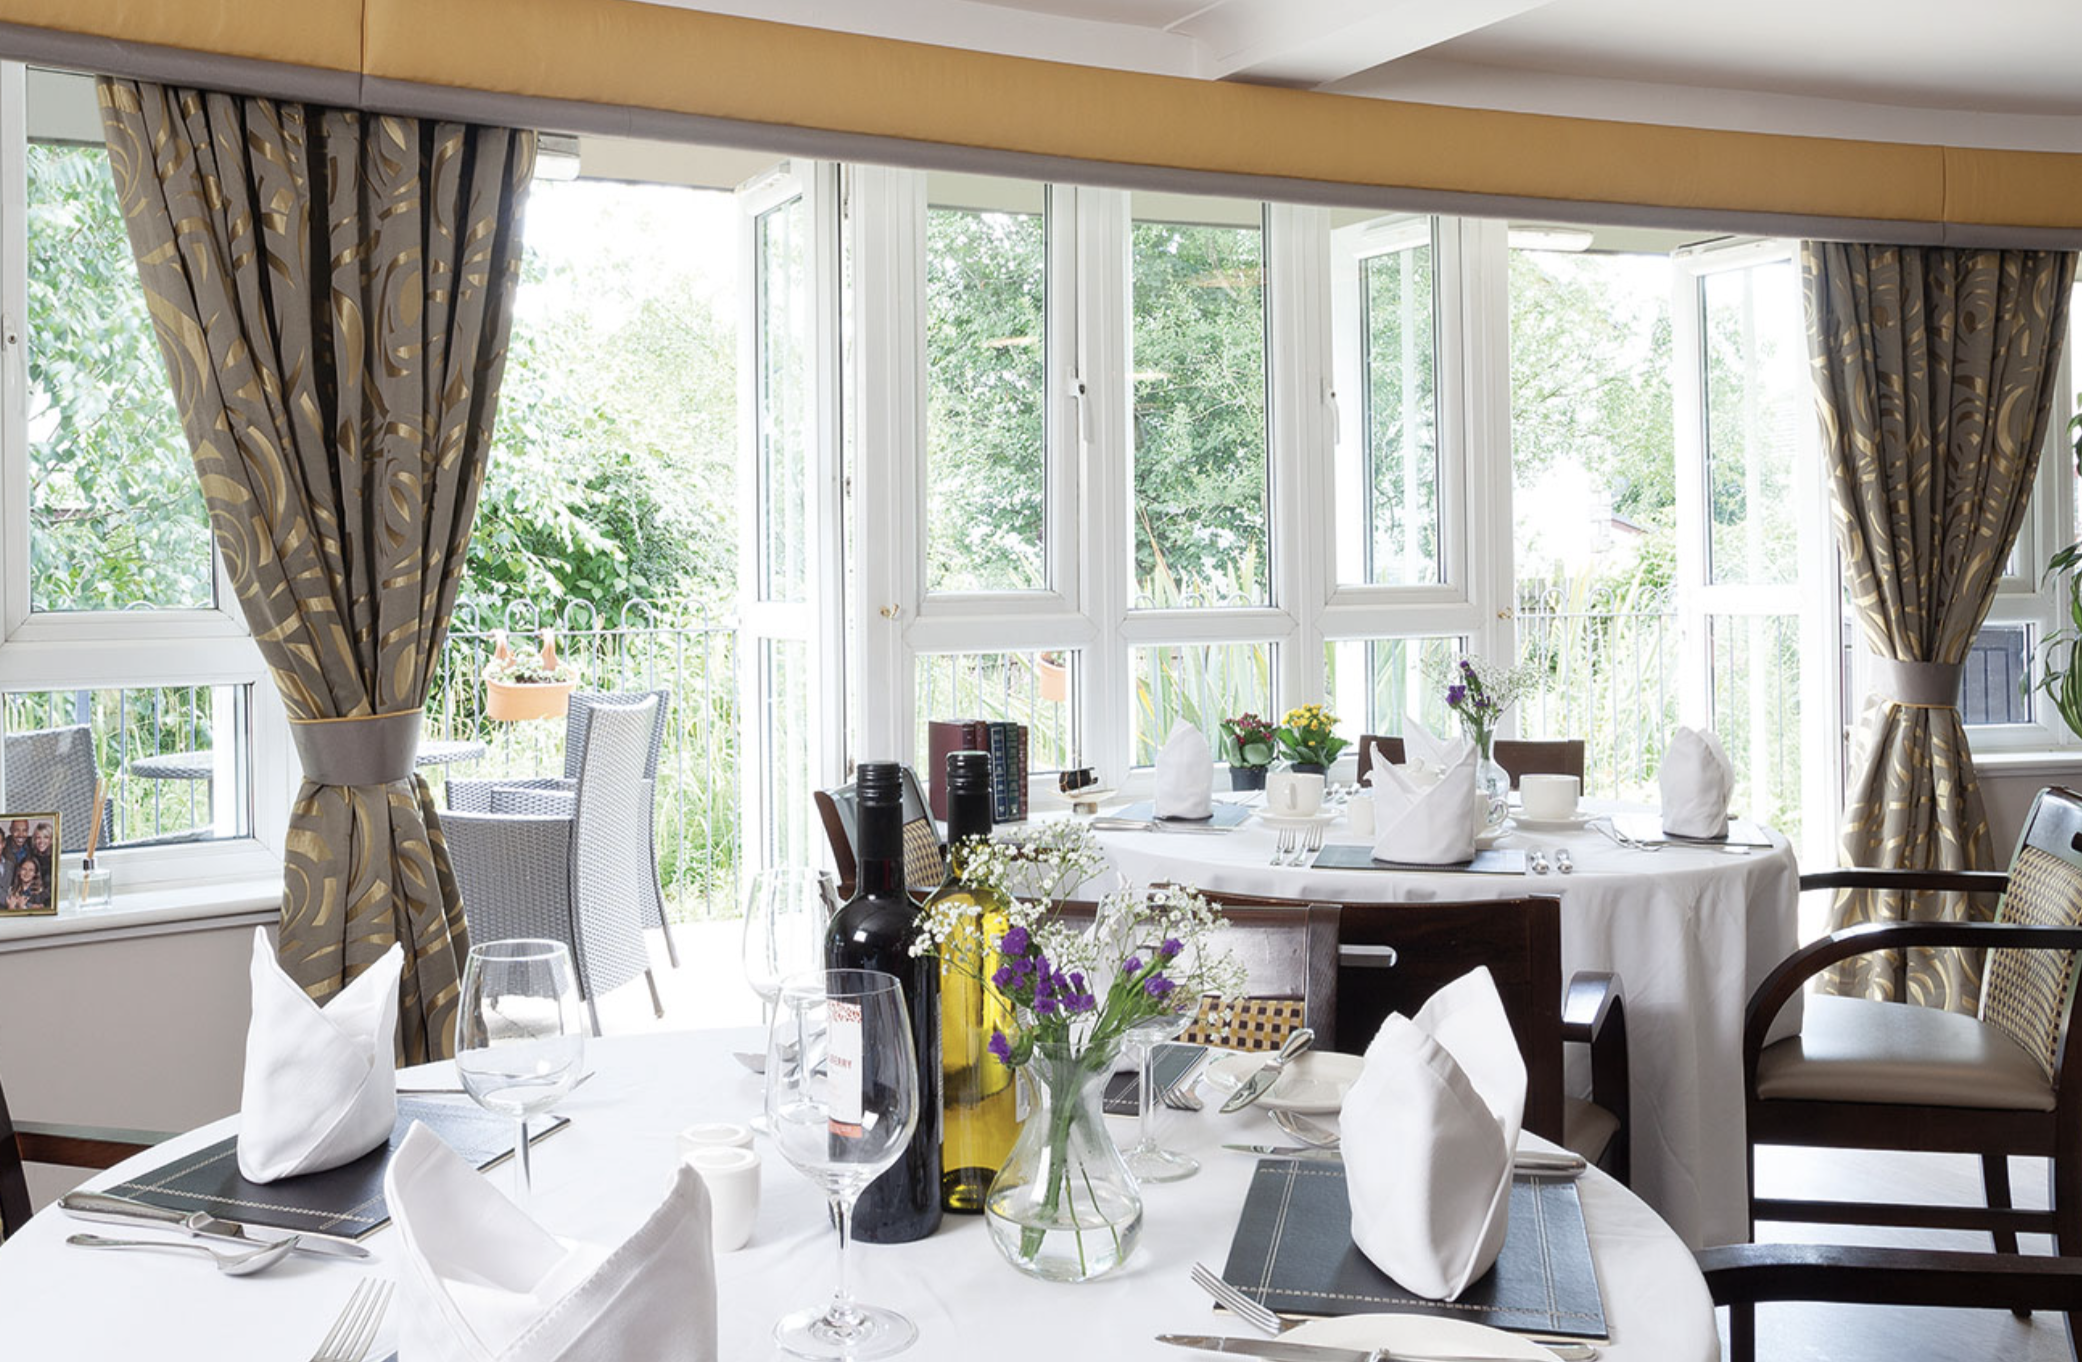 Dining area of Heron Hill care home in Kendal, Cumbria